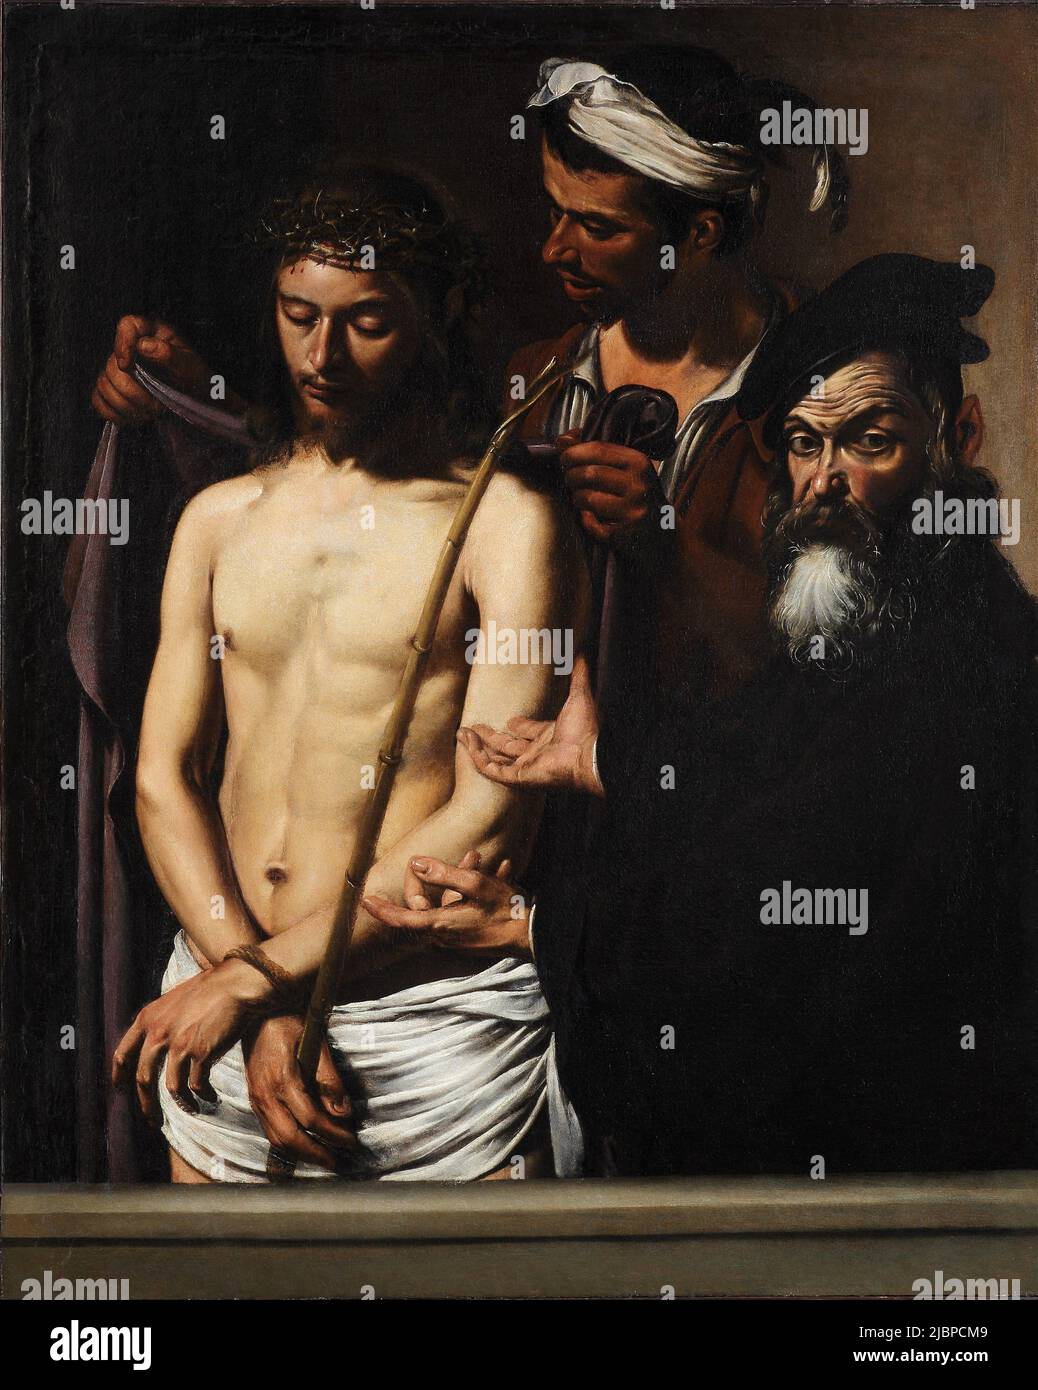 Ecce Homo by Caravaggio (1571-1610). The painting depicts the moment when Pontius Pilate presents a beaten and whipped Jesus to the crowd with the words Ecce Homo (Behold the man). Jesus has the crown of thorns on his head and a red or purple robe (to mock the claim to be king of the jews). Stock Photo